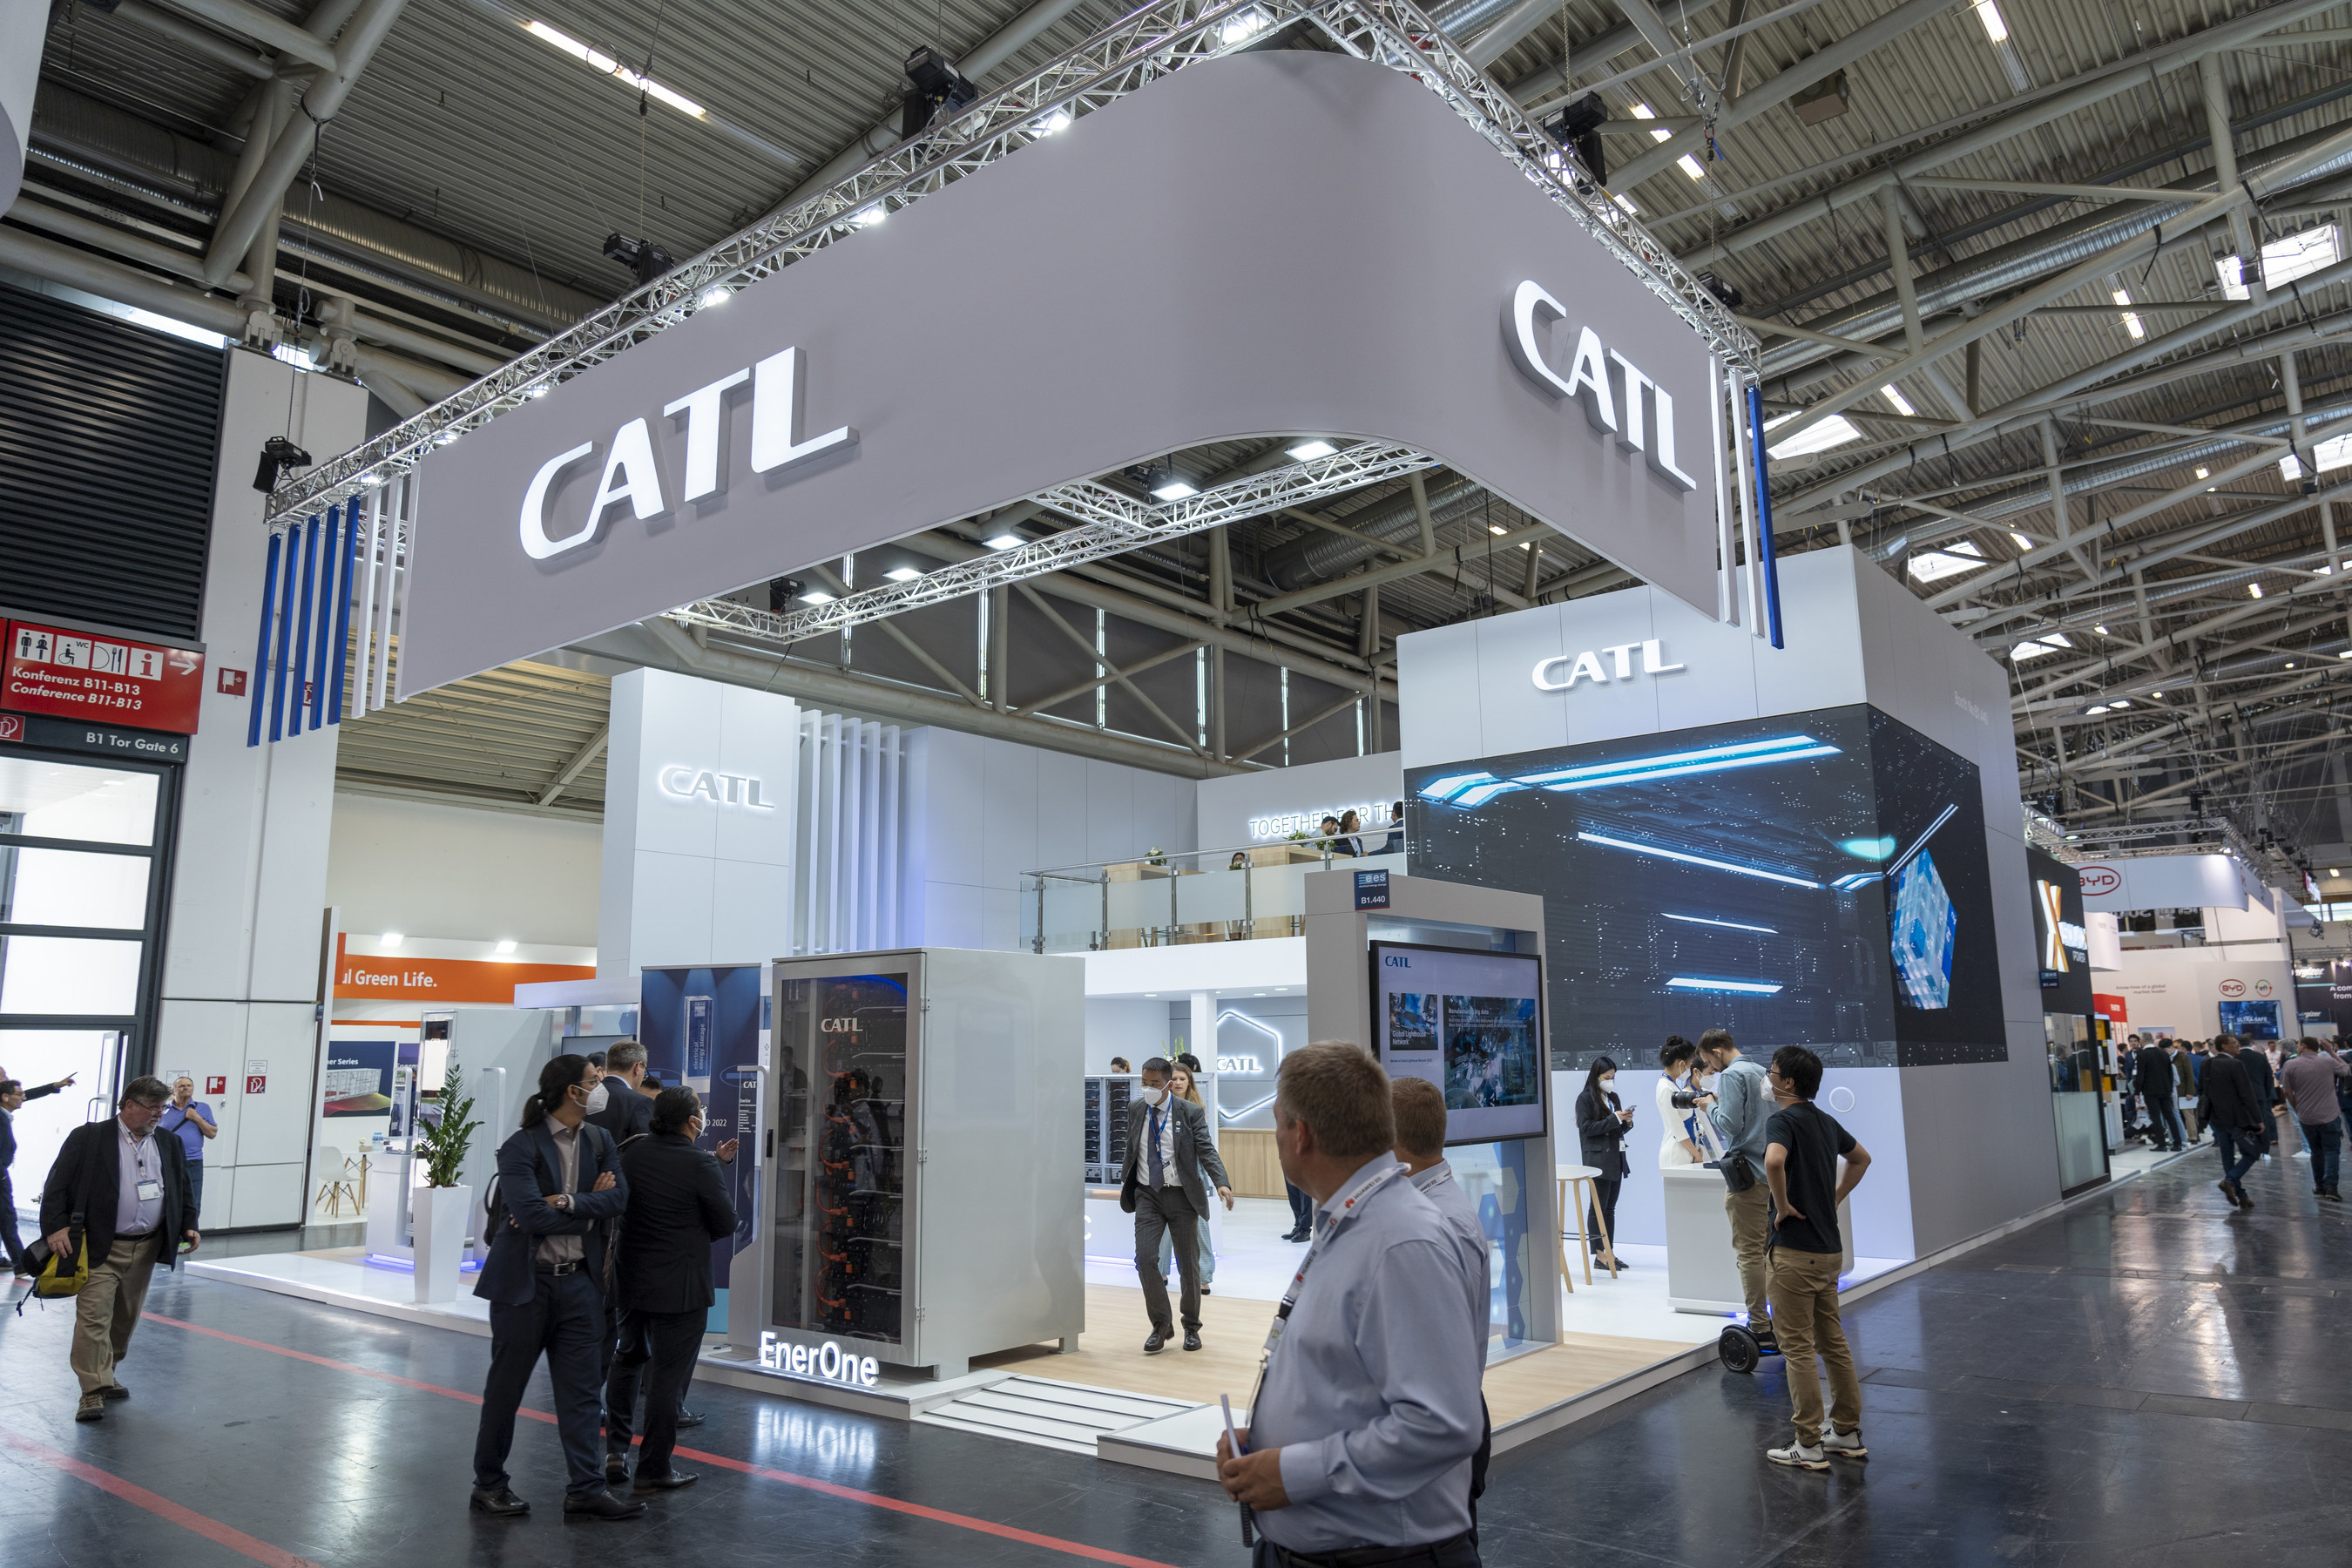 CATL’s booth B1.440 at ees Europe